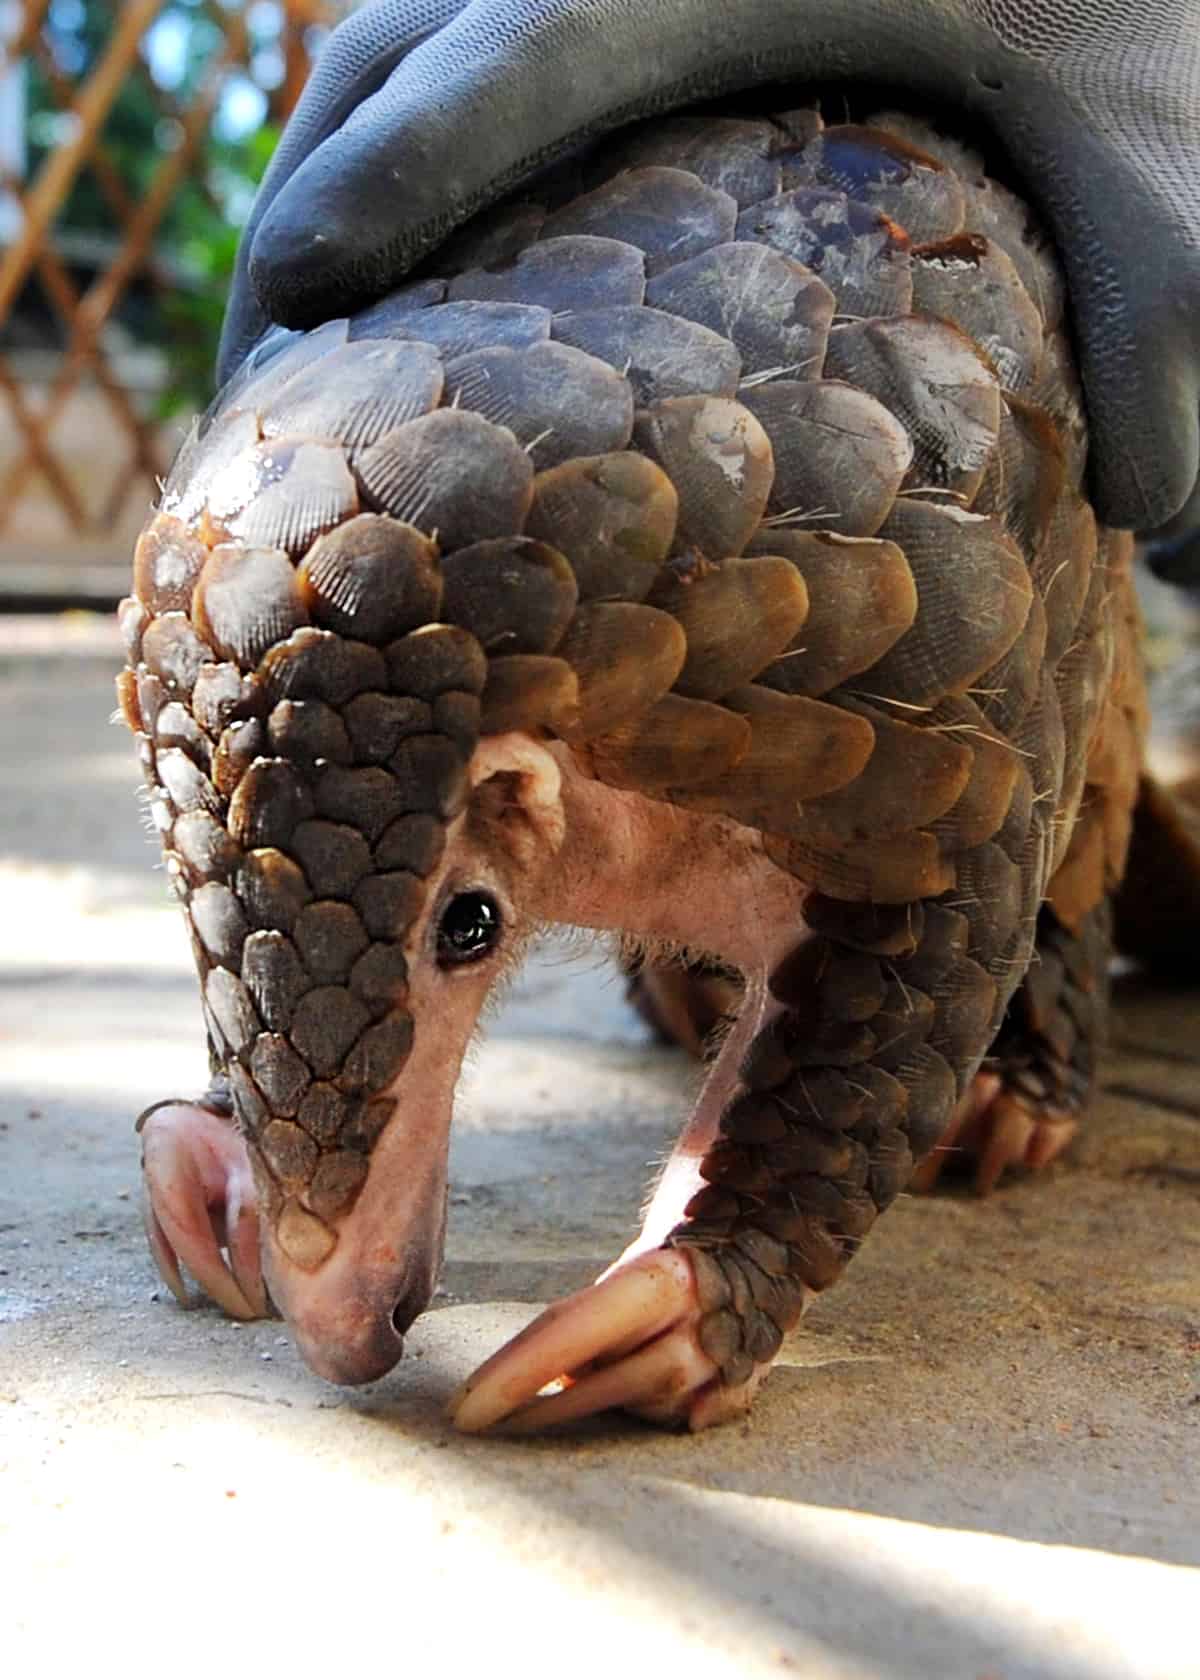 Why are pangolins endangered